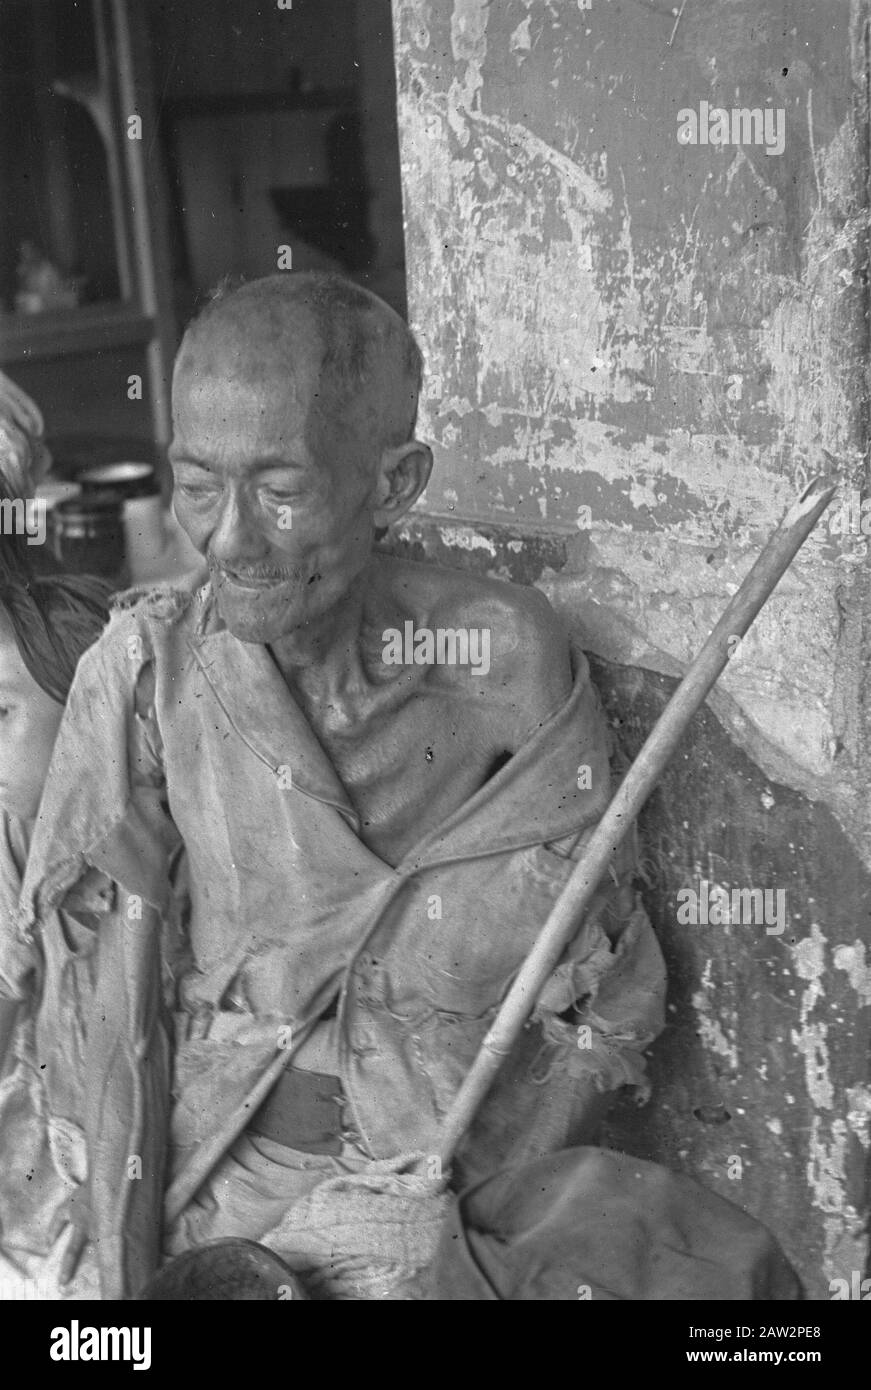 Photoreportage Palembang  Outpatient? Emaciated elderly man dressed in rags Date: 1947 Location: Indonesia Dutch East Indies Stock Photo